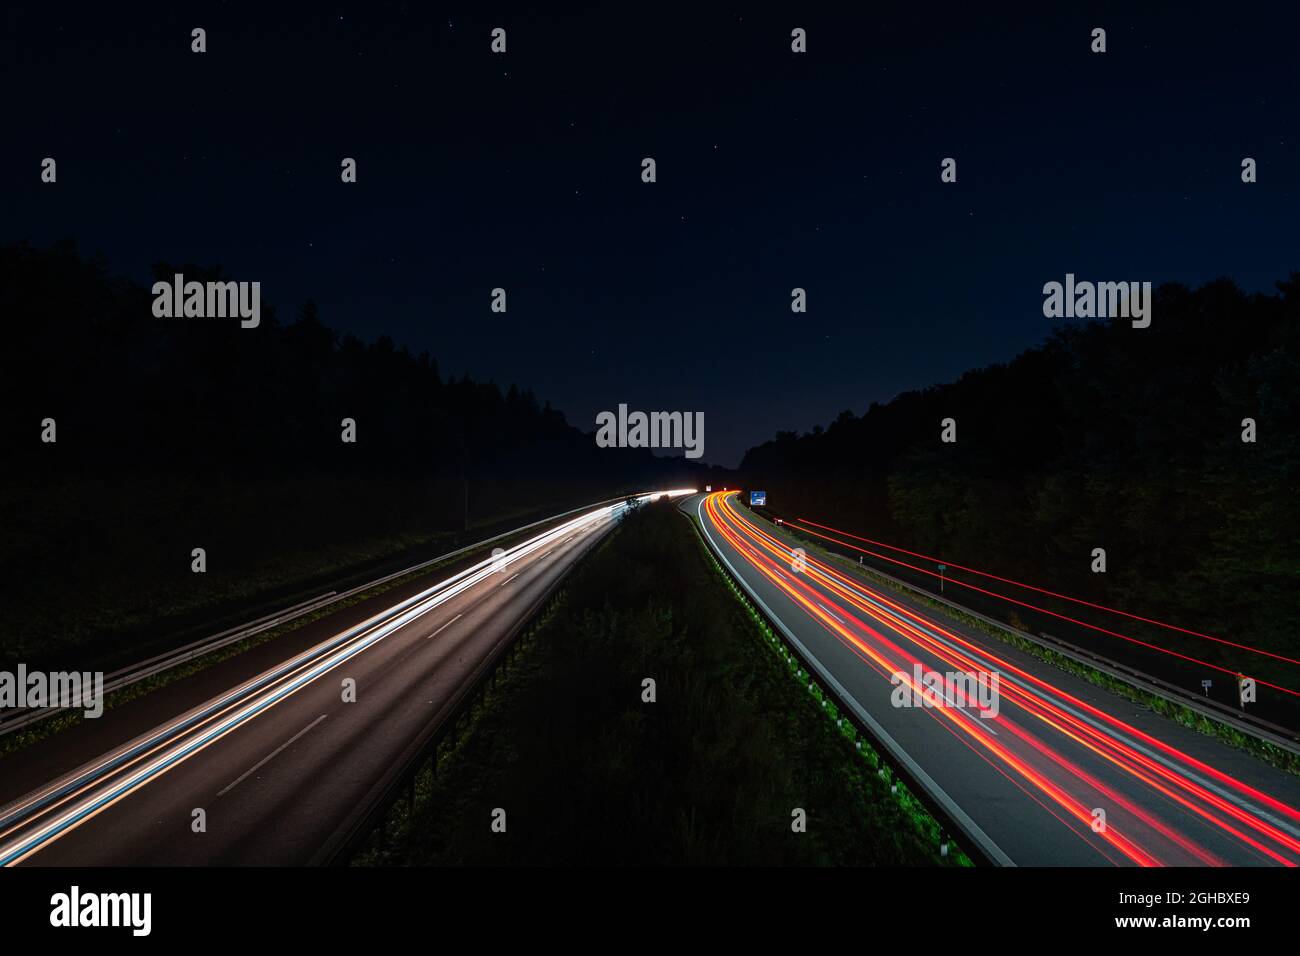 Lighttrails of a traffic motorway from the cars front and headlights, passing fast the point ov view. Stock Photo